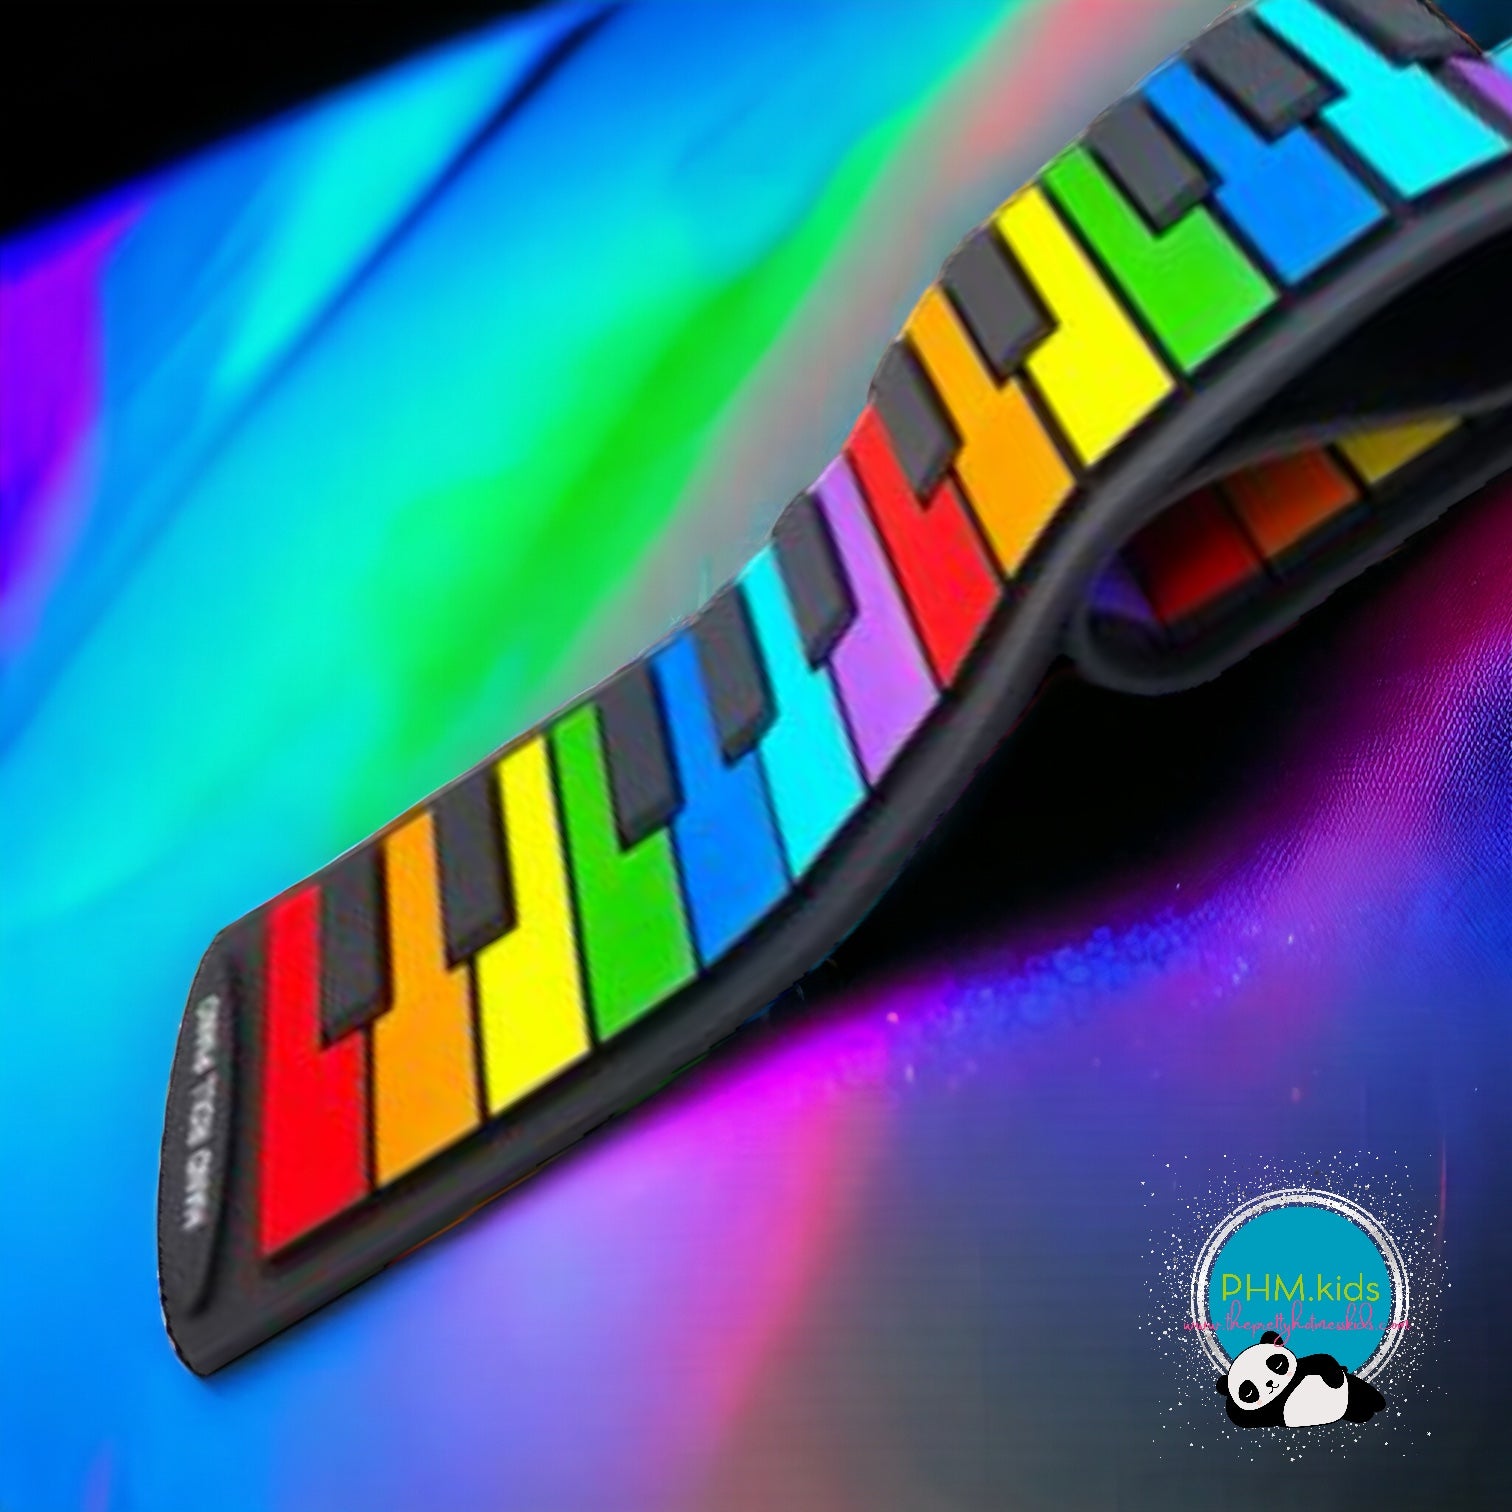 Rock And Roll It - Rainbow Piano